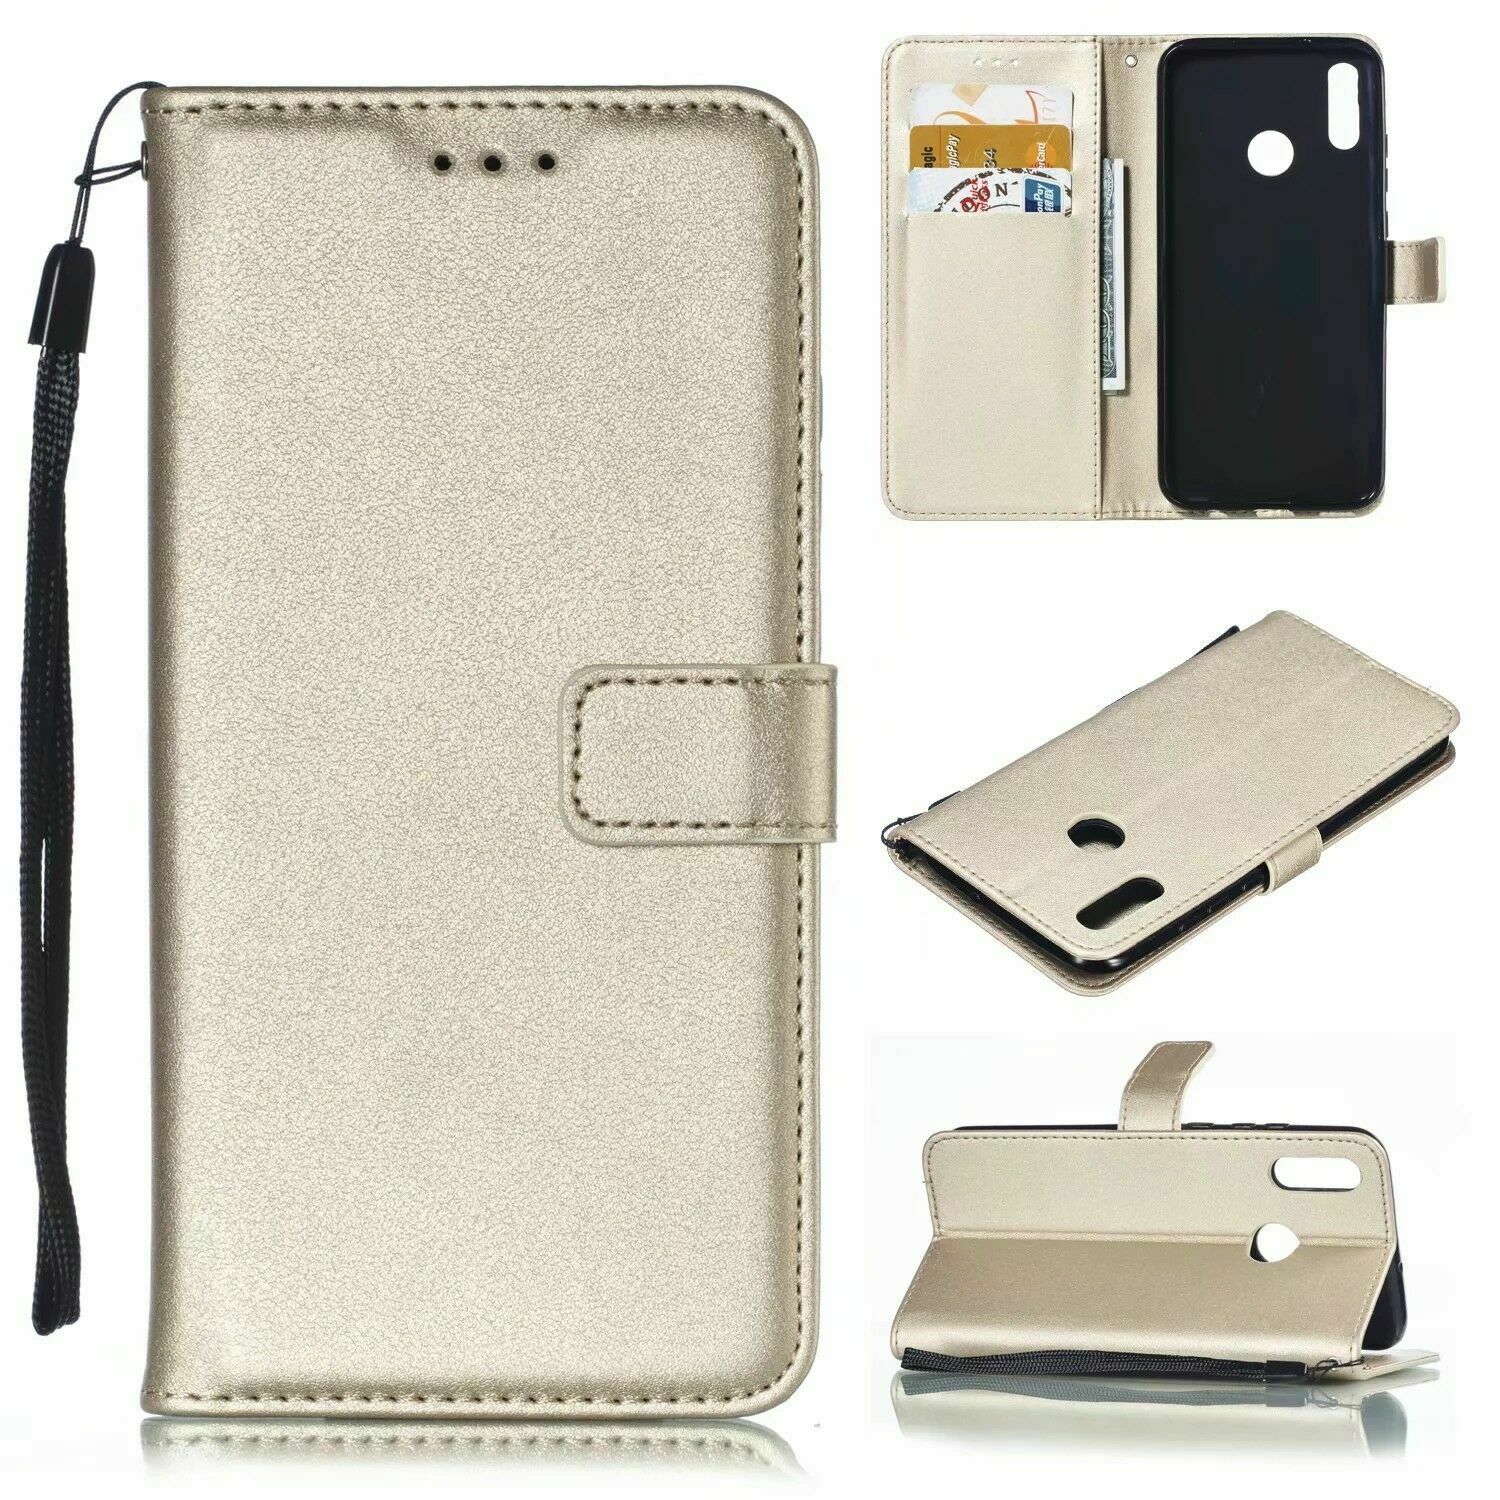 【CSmart】 Magnetic Card Slot Leather Folio Wallet Flip Case Cover for Huawei P30 Lite, Gold